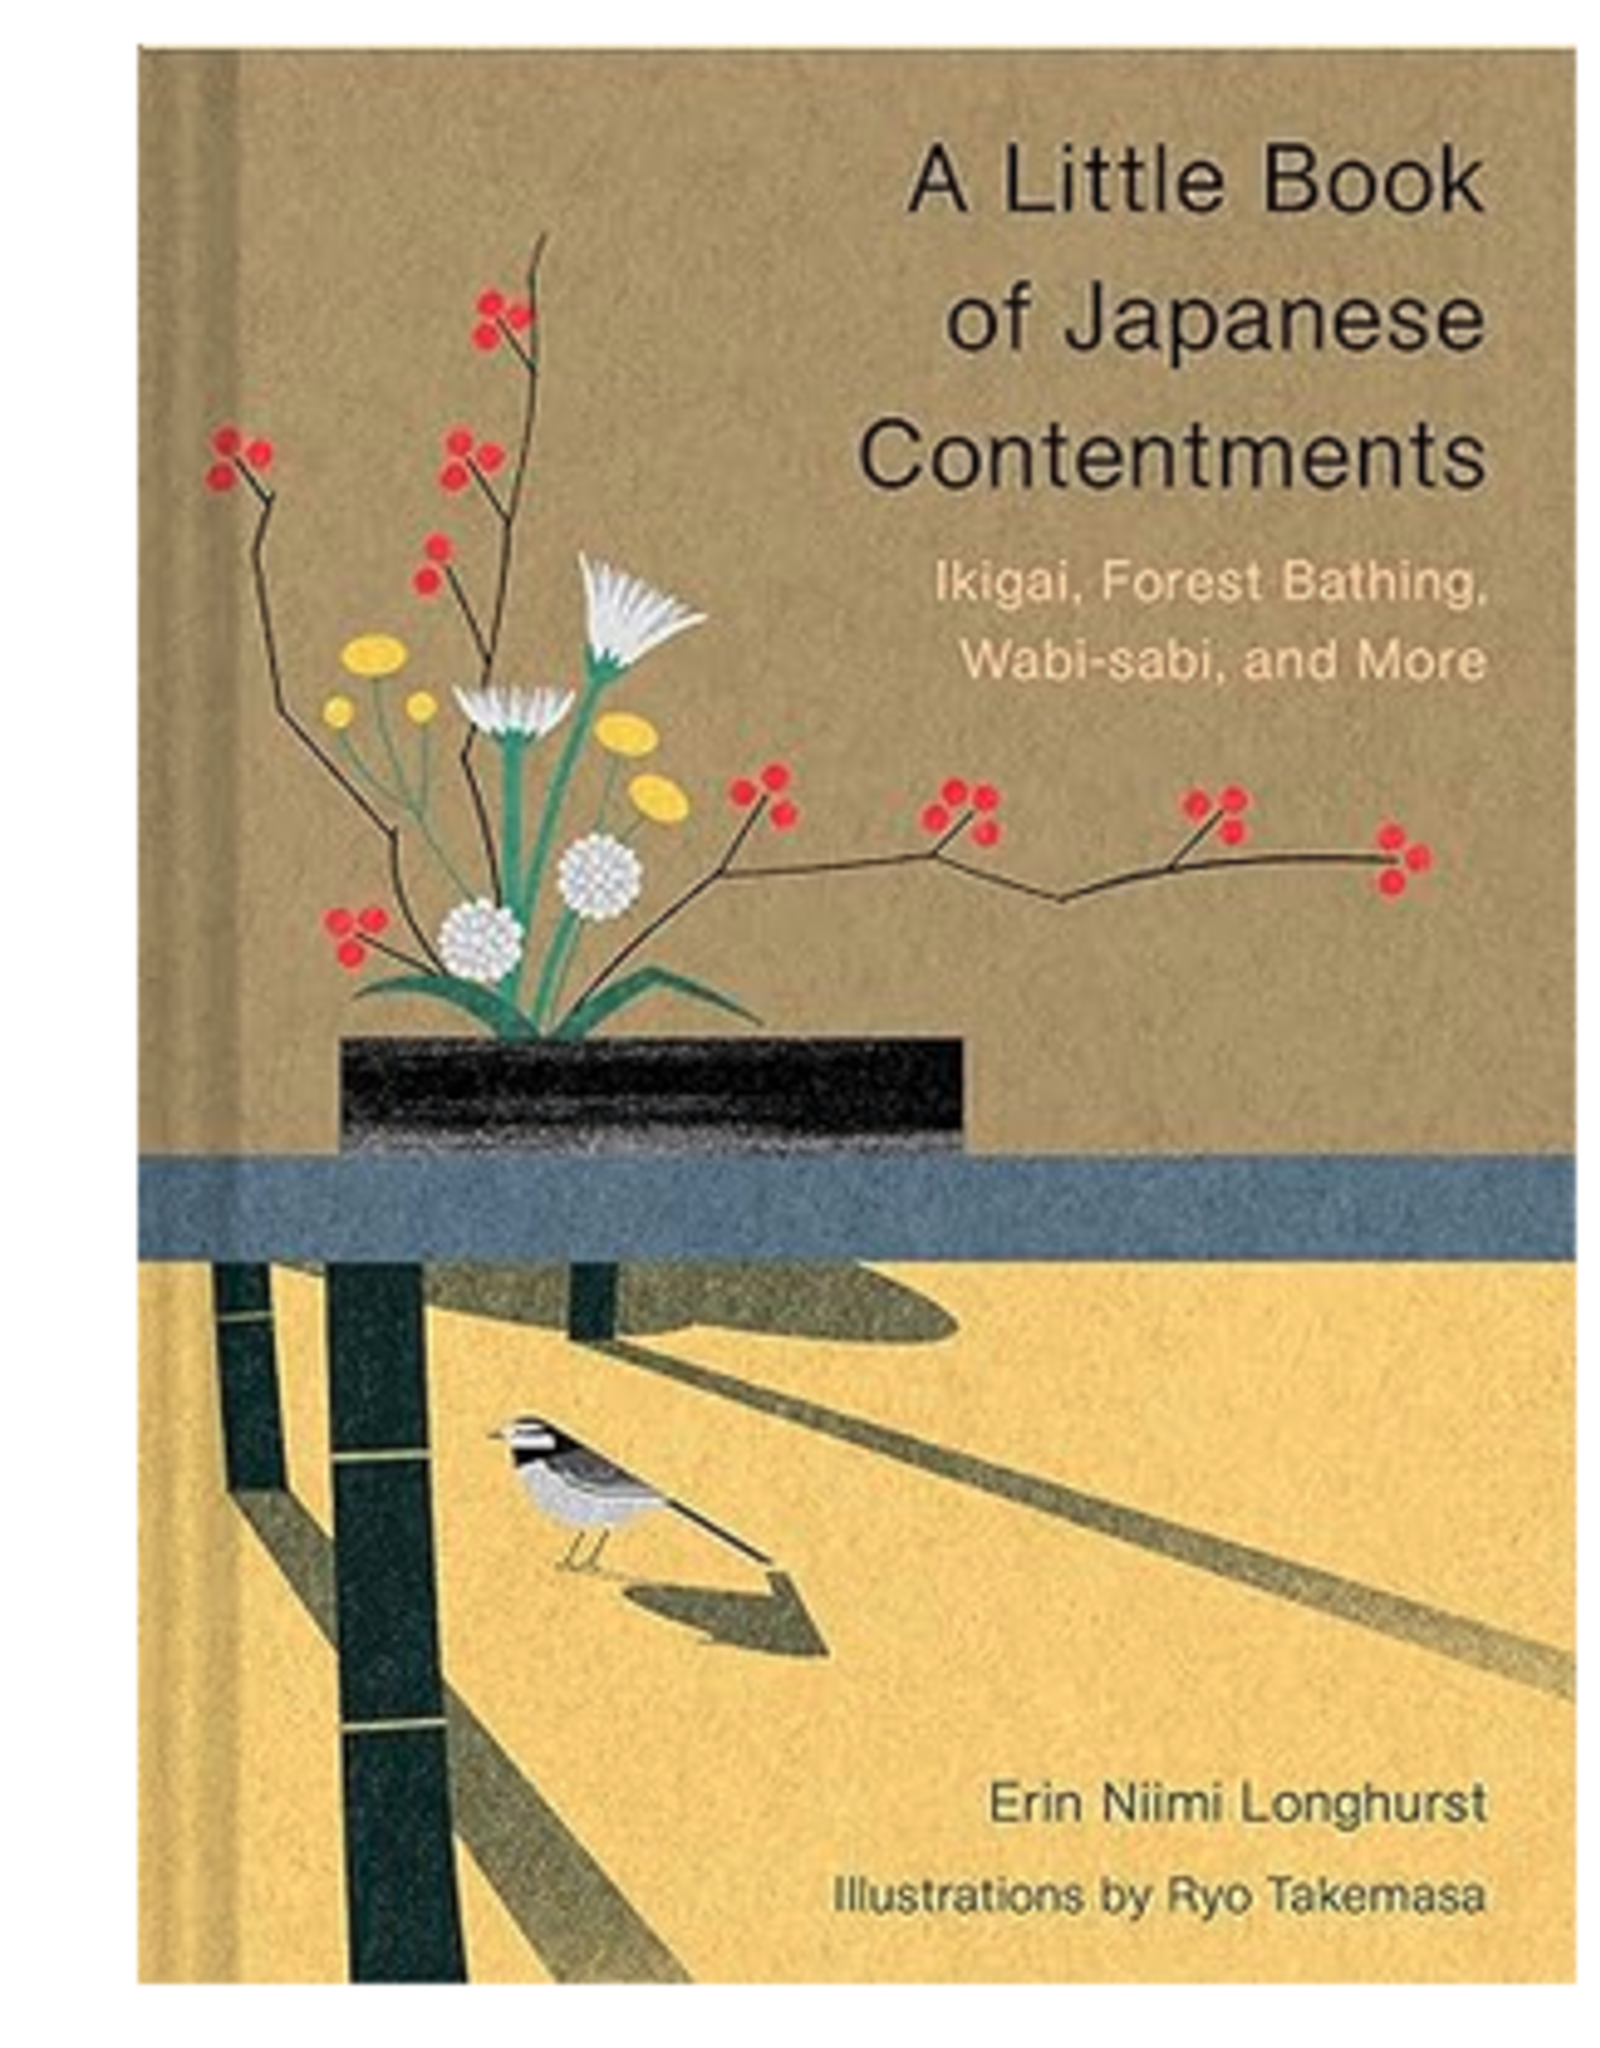 A Little Book of Japanese Contentments